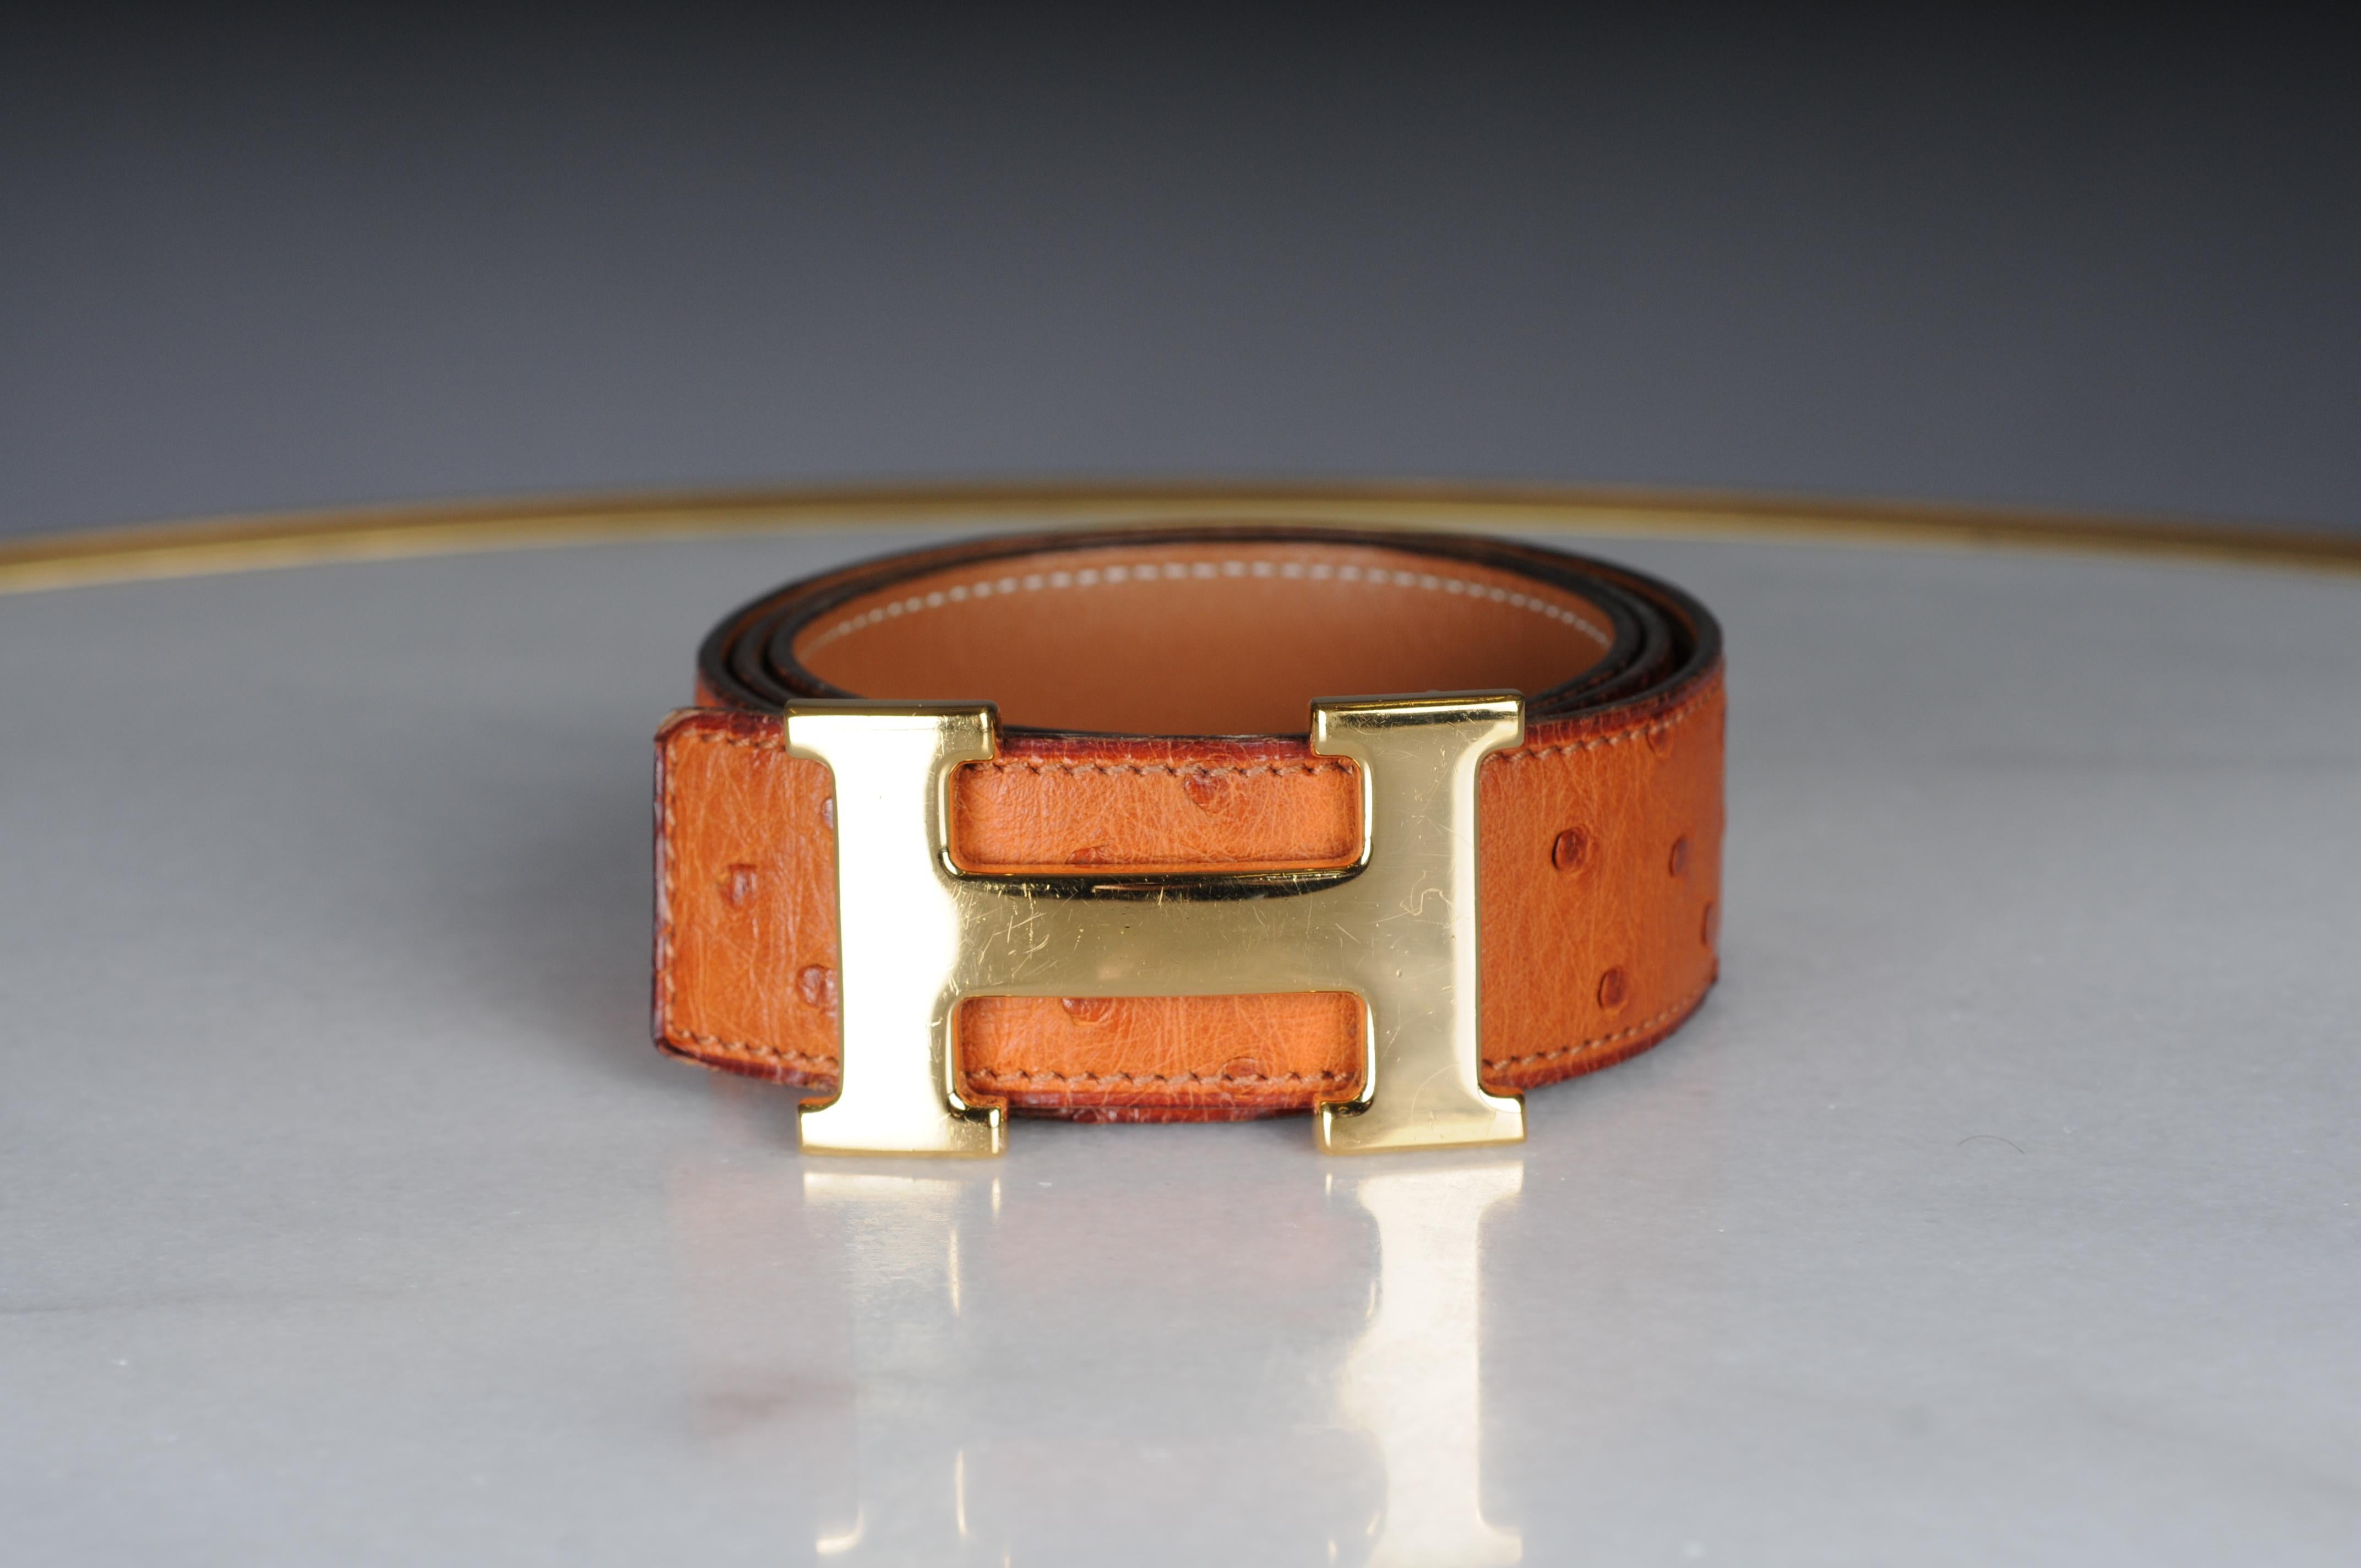 Hermes Paris interchangeable ostrich leather belt for  Gold H buckle belt In Good Condition For Sale In 10707, DE